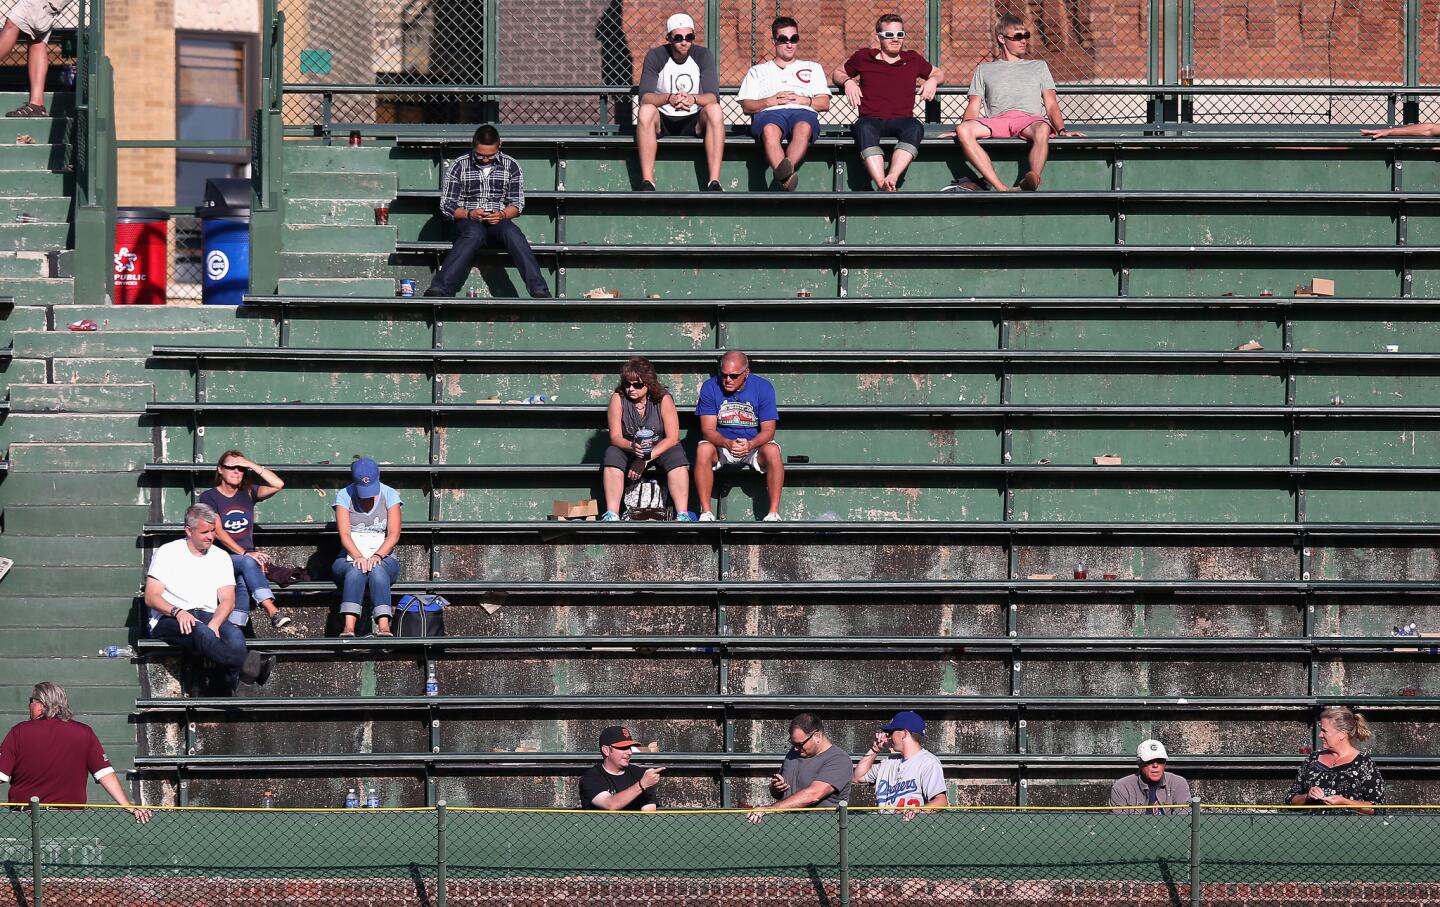 Few fans are left in the right field bleachers in the 9th inning.